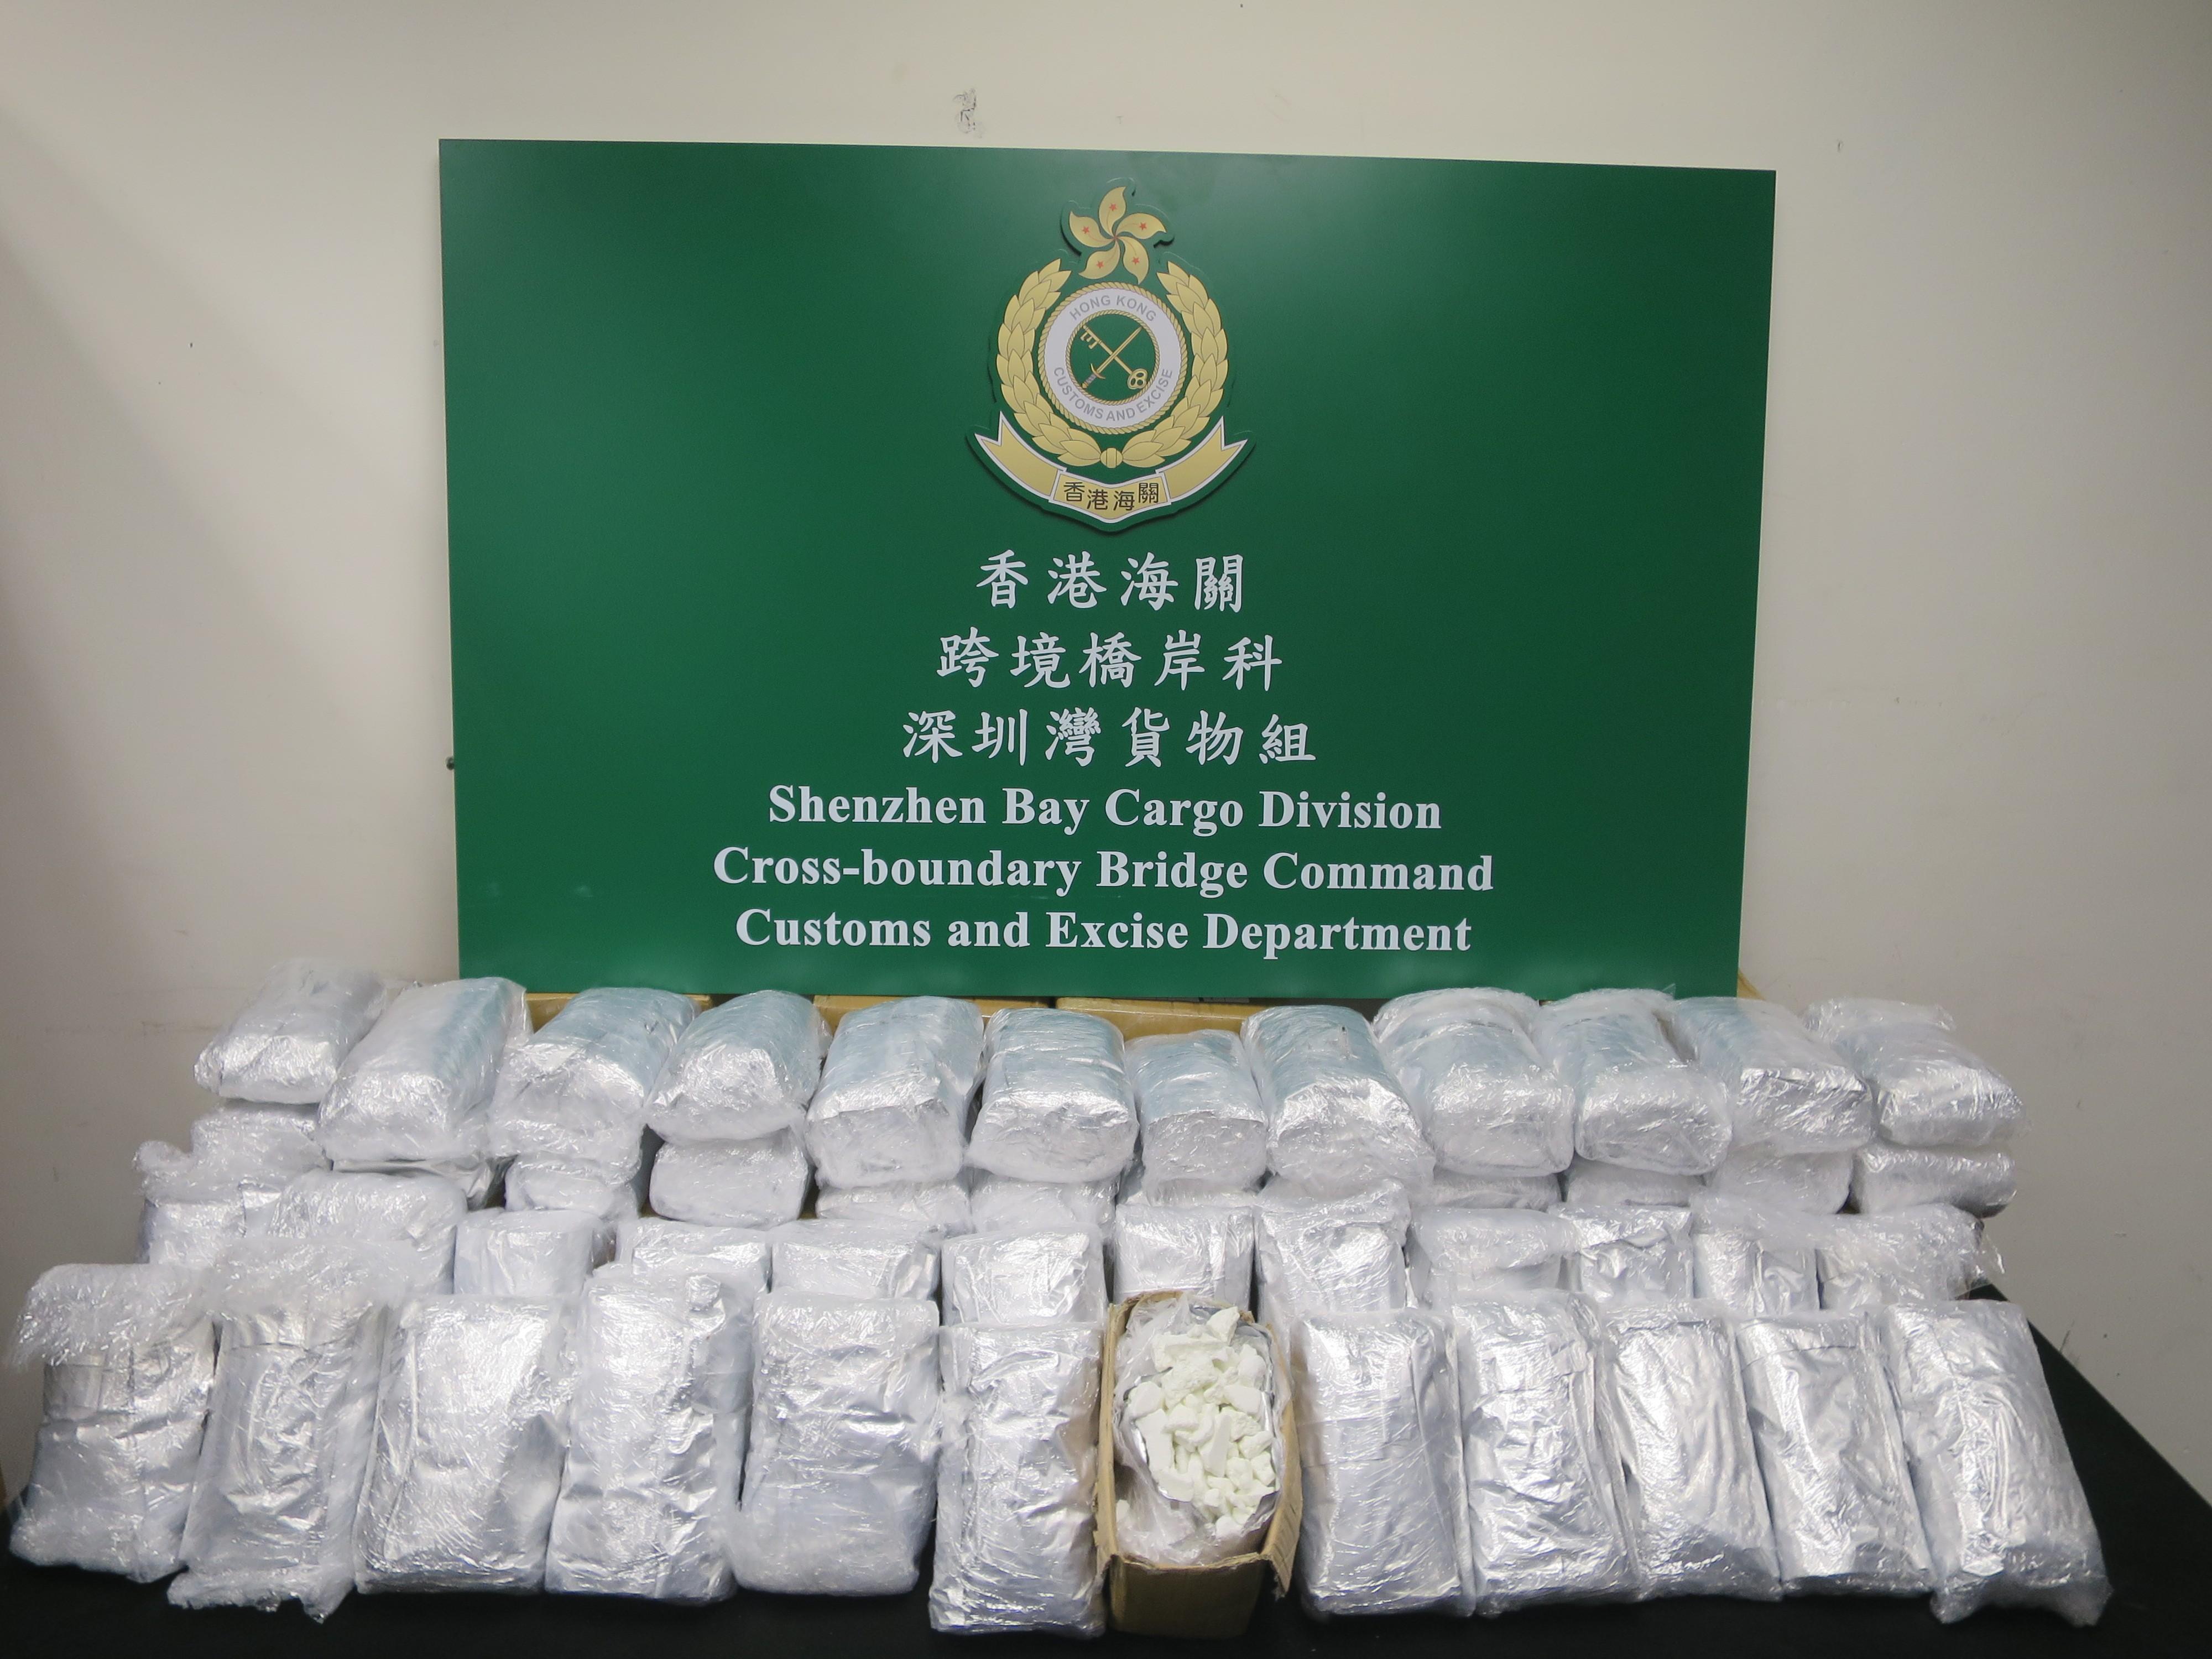 Hong Kong Customs on July 11 seized a batch of suspected controlled items, including about 44.2 kilograms of suspected synthetic cathinone (bath salts), about 1 300 suspected prohibited weapons and about 10 000 suspected alternative smoking products, as well as about 580 items of suspected counterfeit goods, at Shenzhen Bay Control Point. The total estimated market value was about $6.3 million. Photo shows the suspected synthetic cathinone seized.